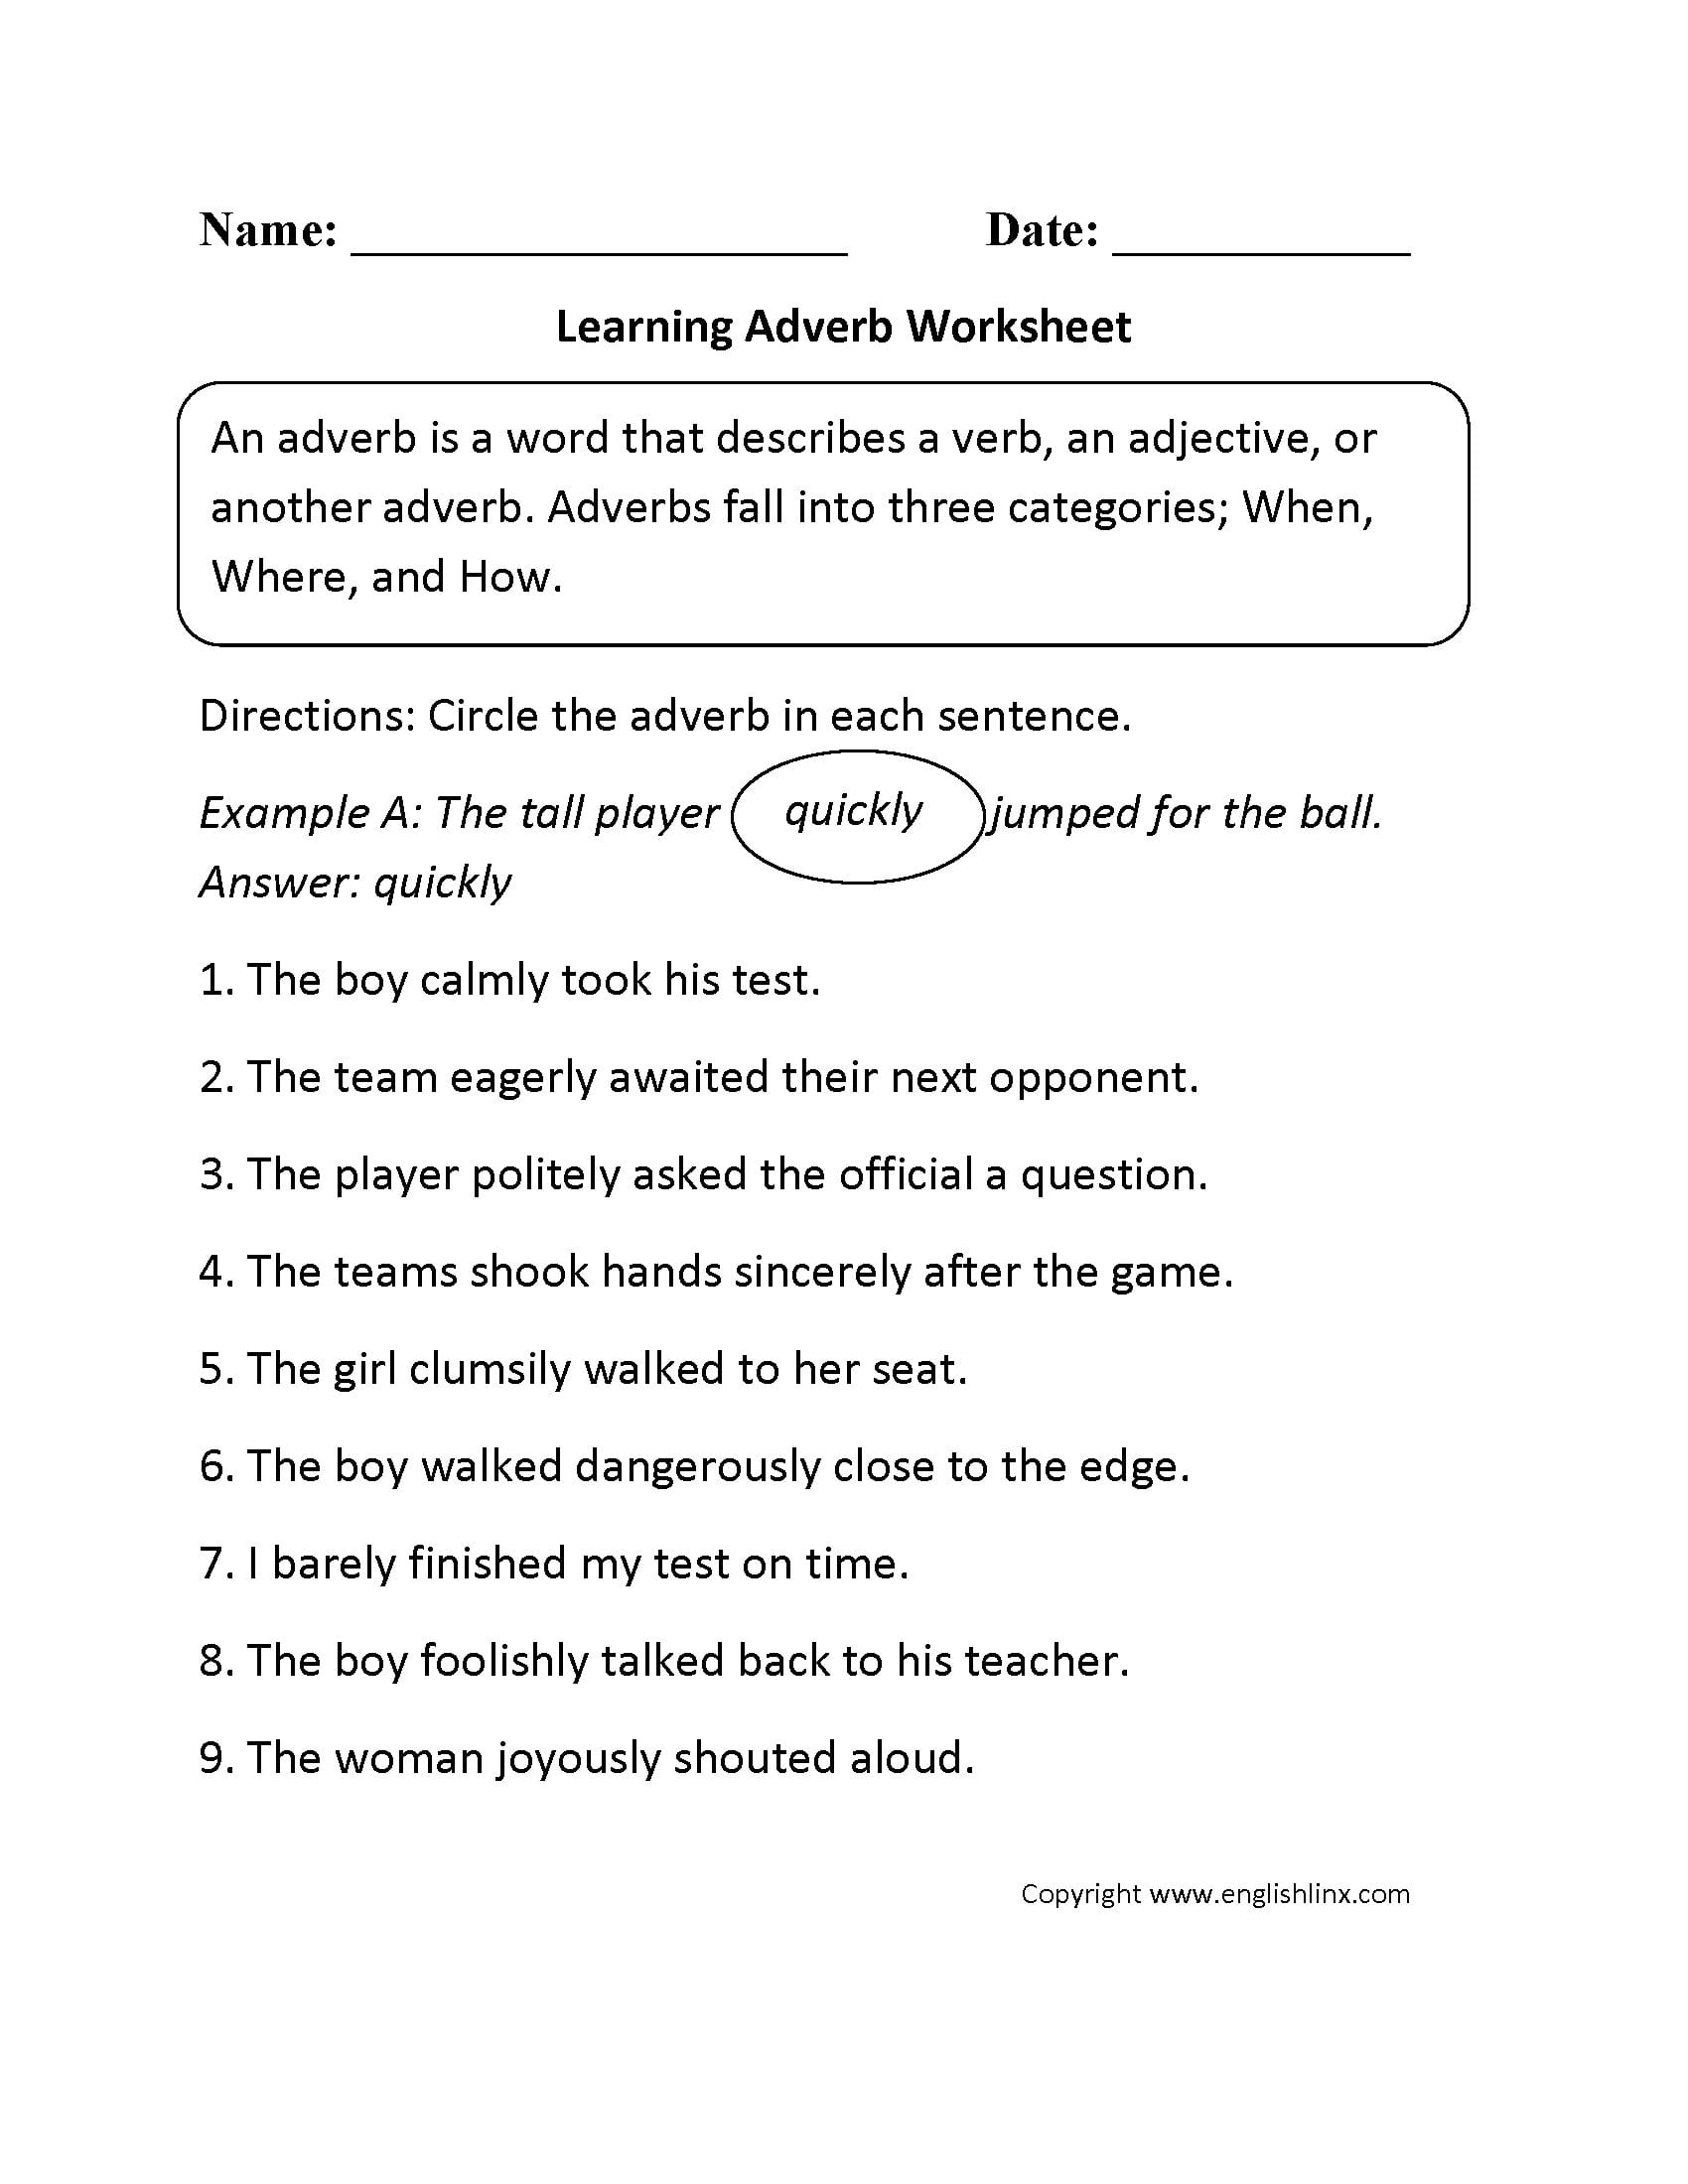 adverb-fill-in-the-blanks-worksheet-have-fun-teaching